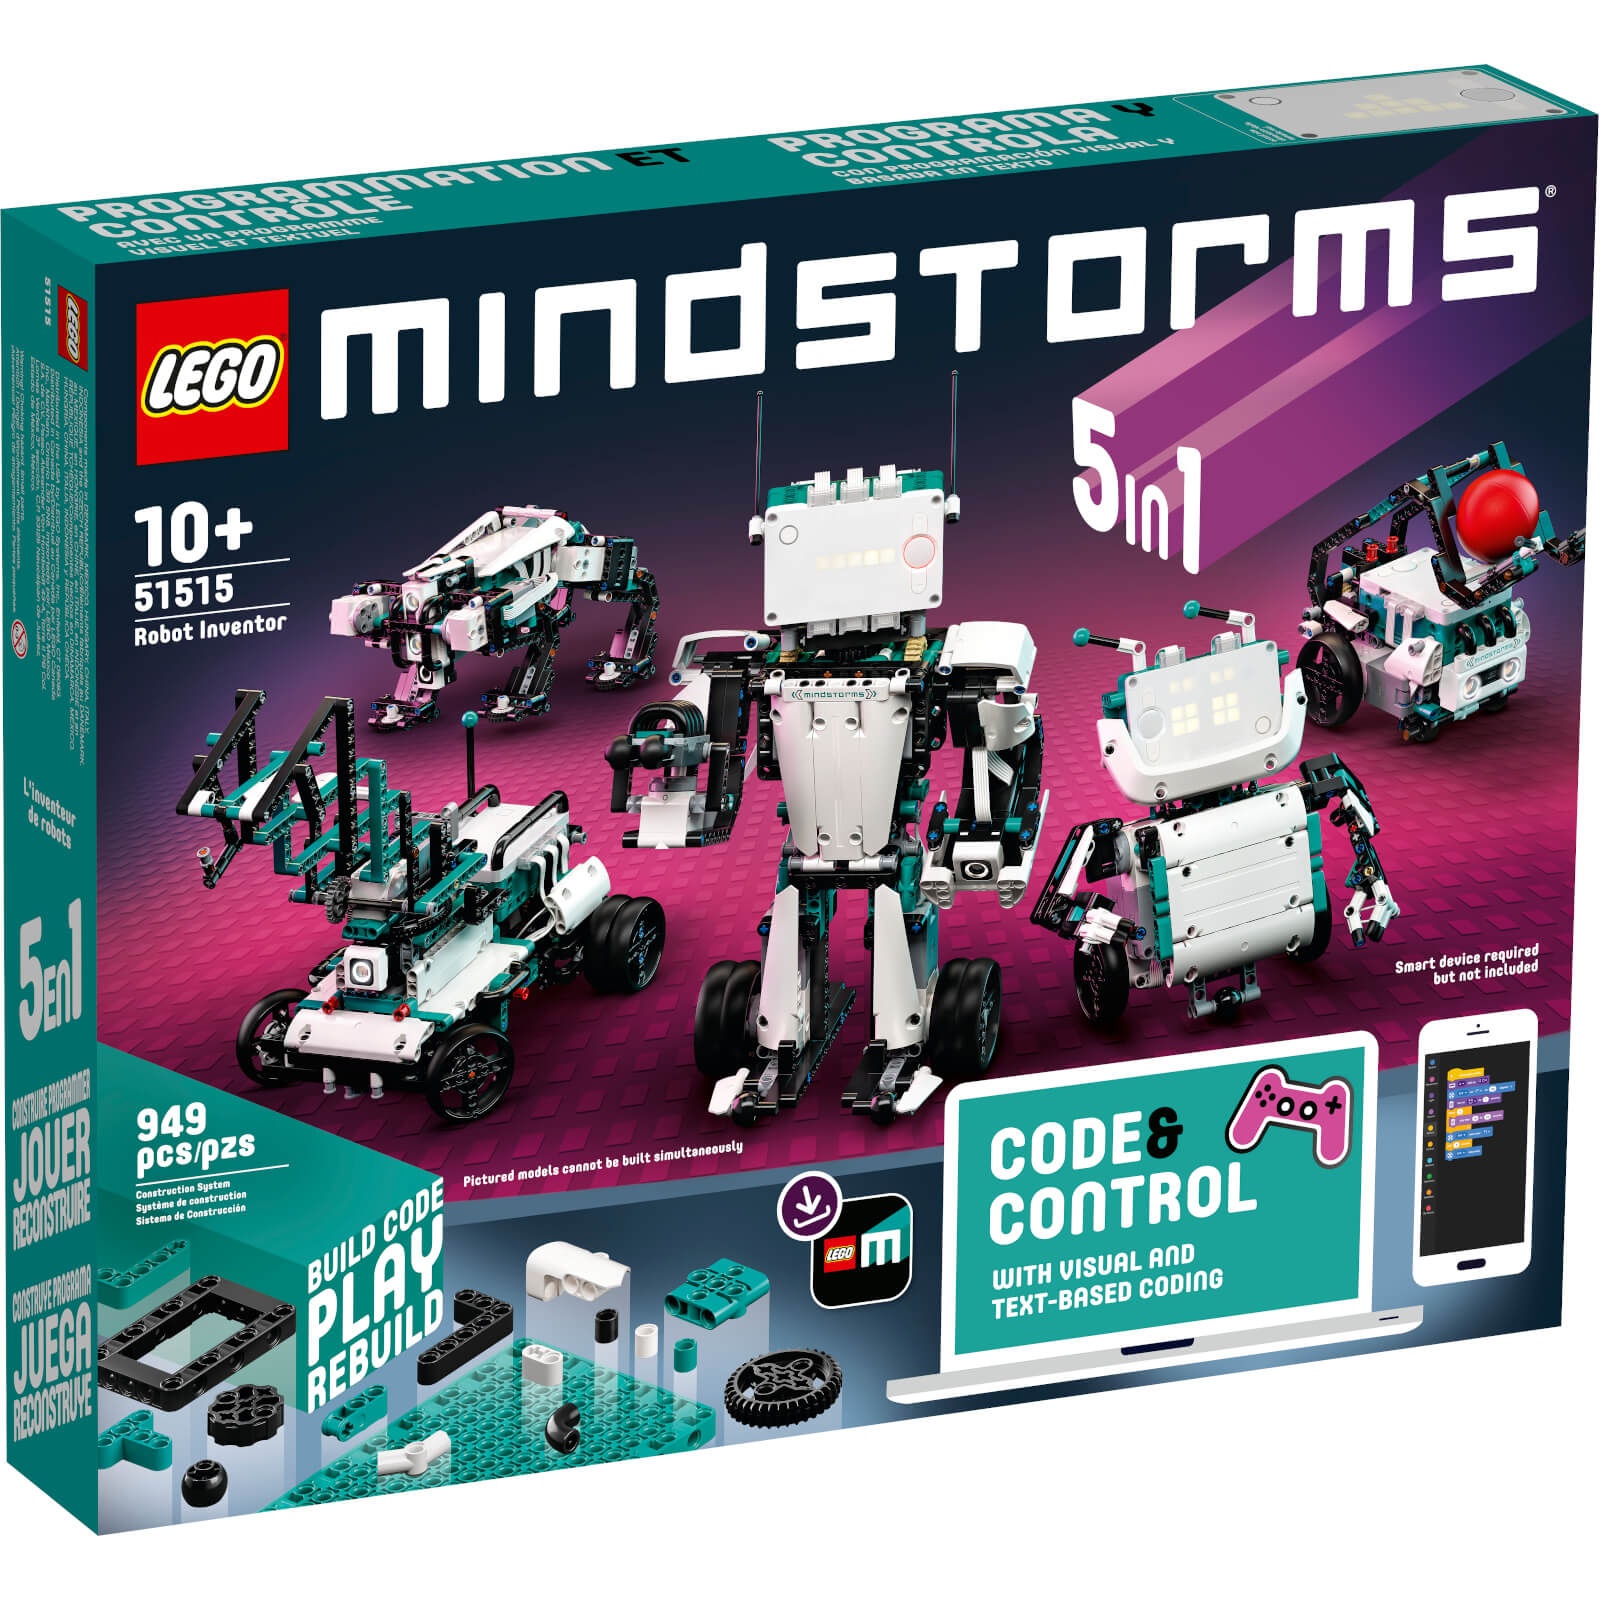 Lego MINDSTORMS: Robot Inventor 5in1 Remote Control Toy (51515)